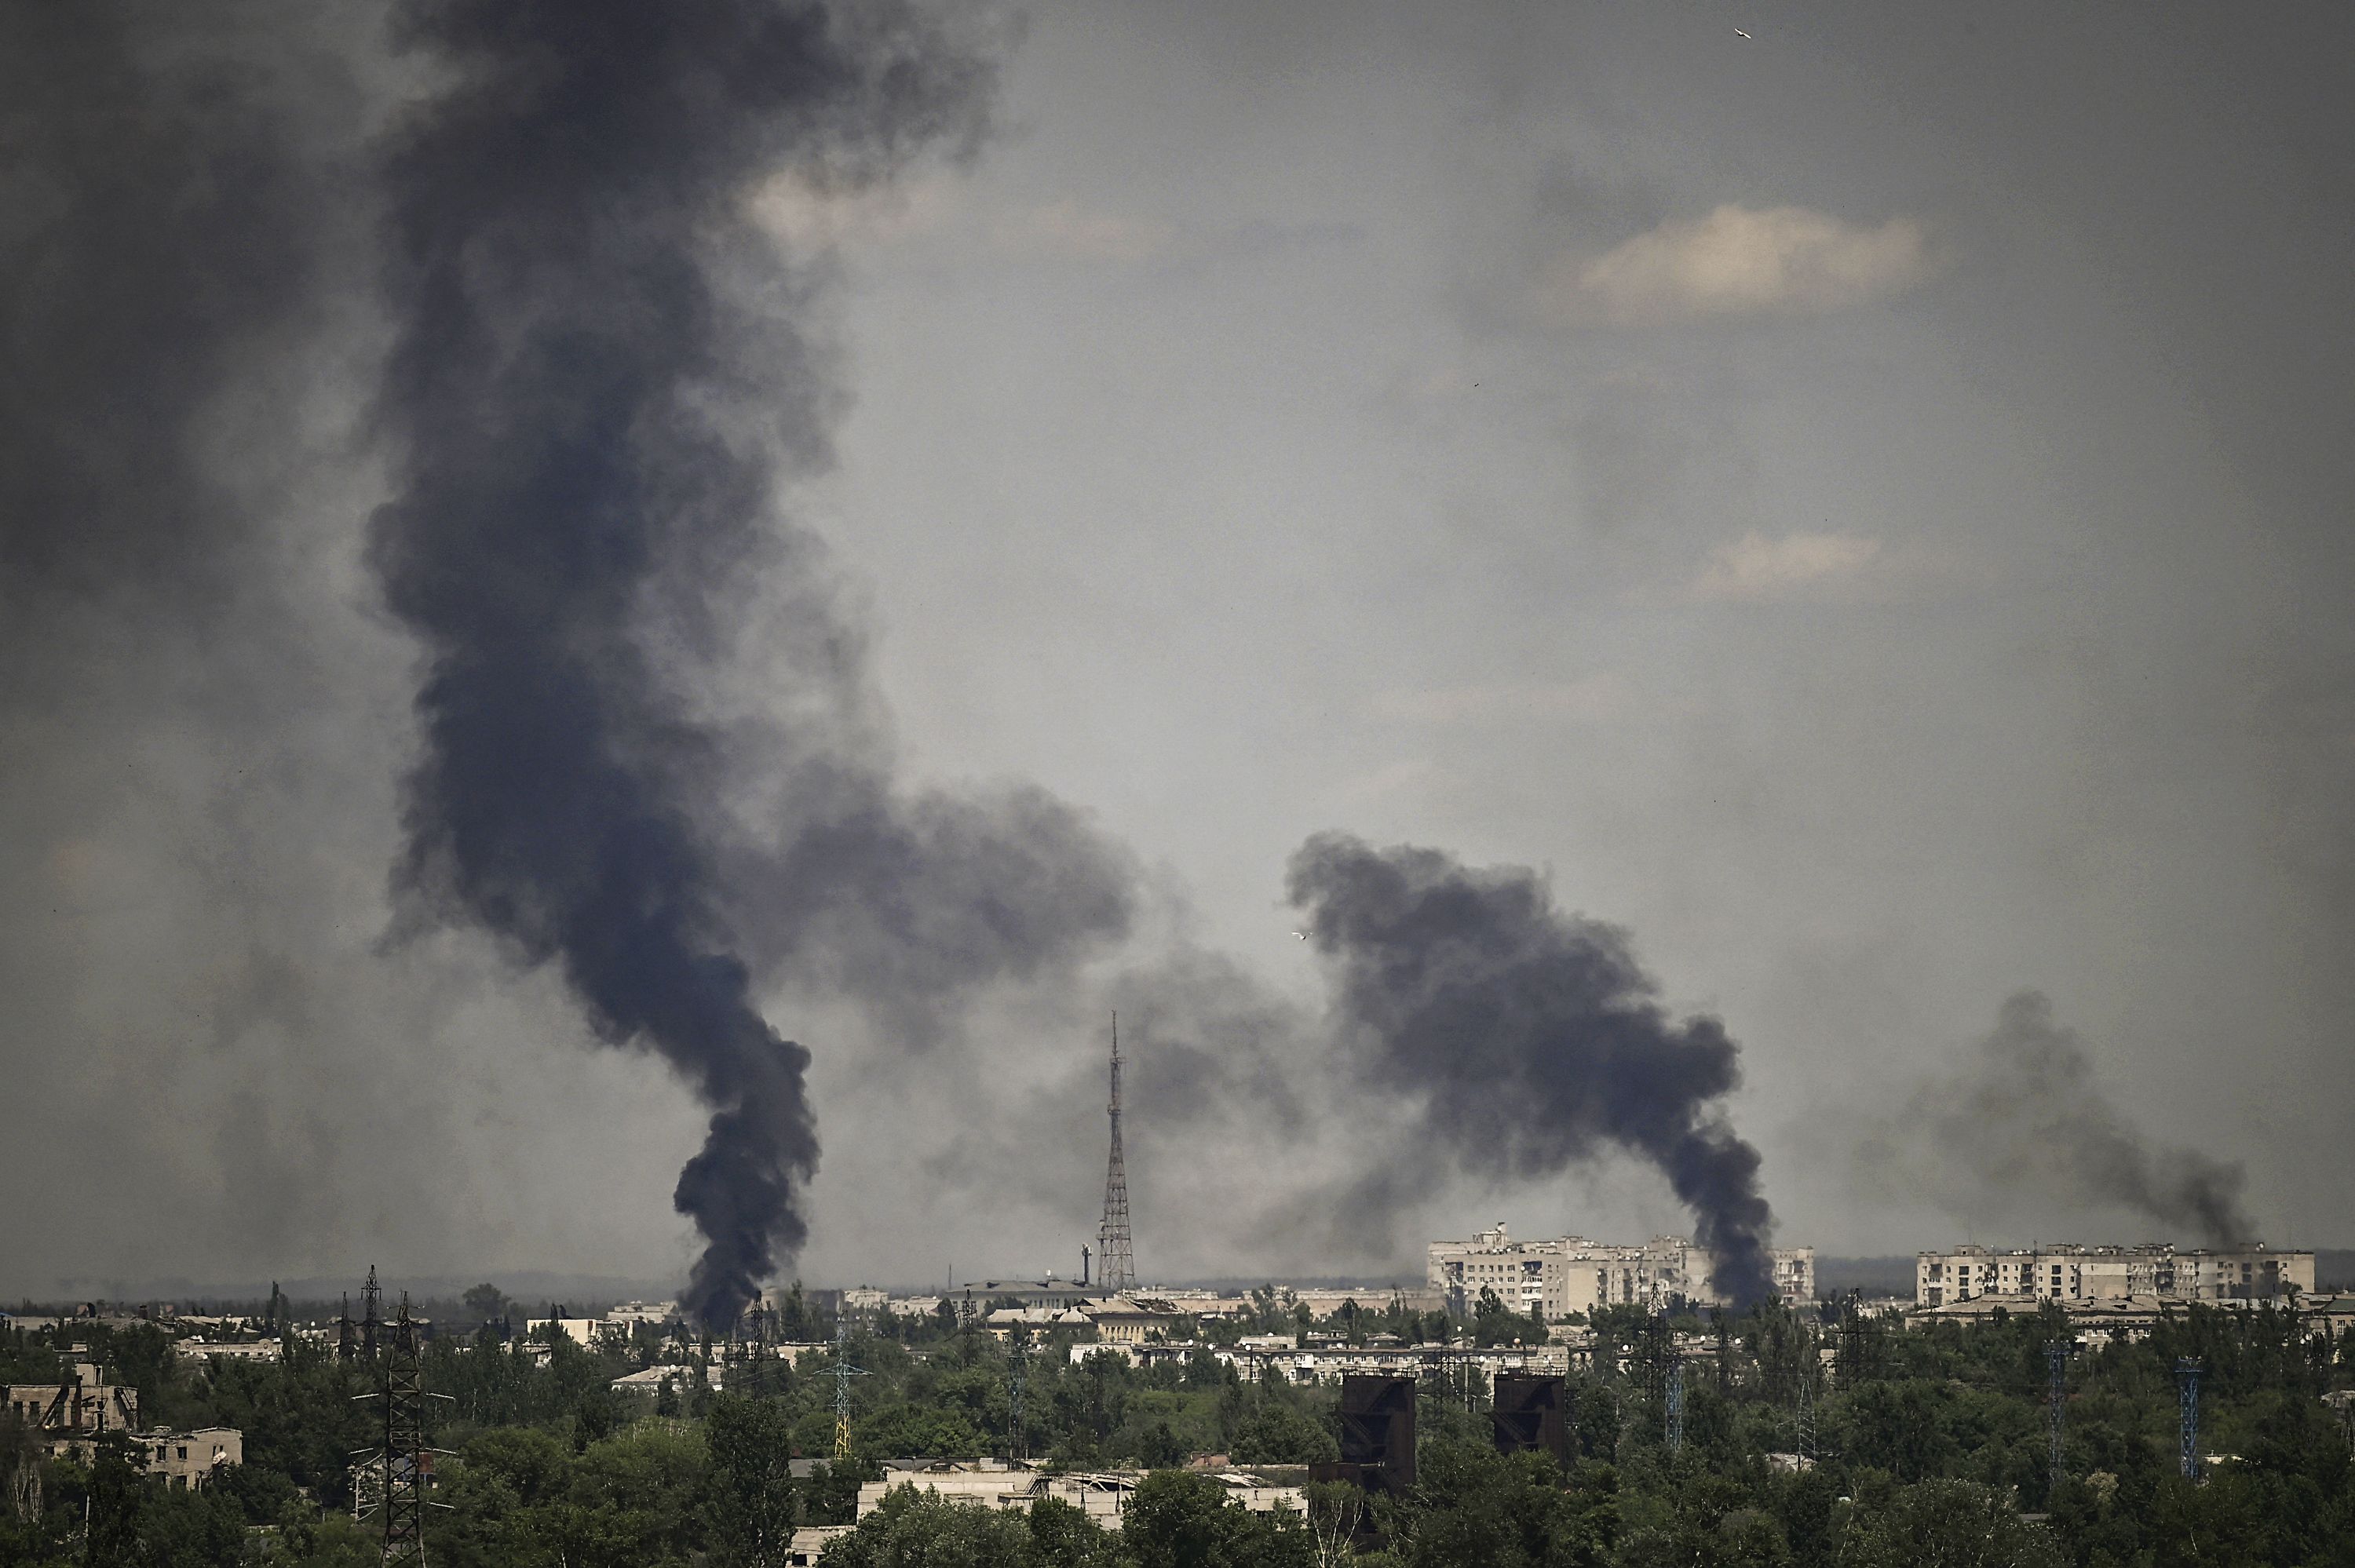 Smoke rises in the city of Severodonetsk during heavy fightings between Ukrainian and Russian troops on Monday, May 30.